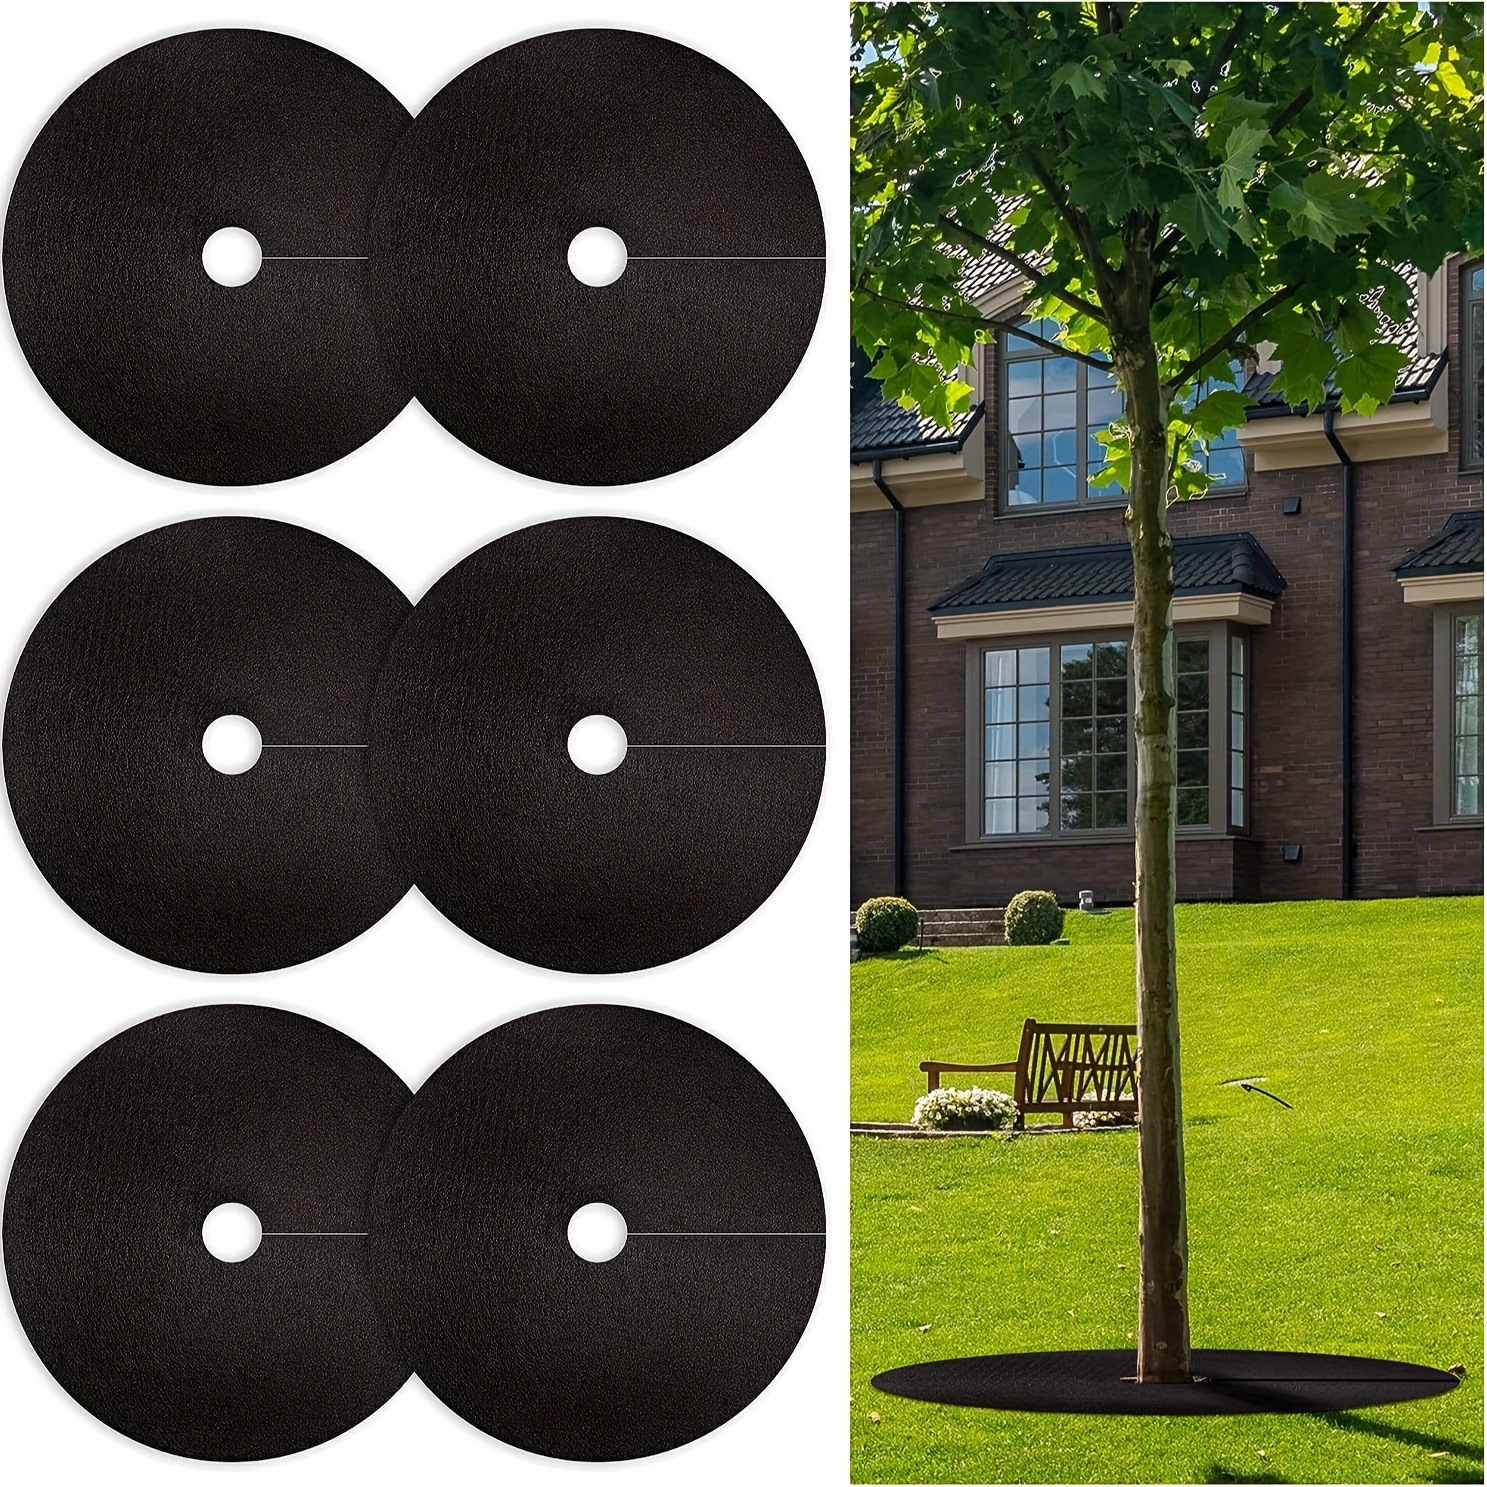 

6 Packs, Non-woven Fabric Tree Protection Pads, Reusable Tree And Weed Barrier Pads, Used For Weed Control And Root Protection, Suitable For Preventing Weed Growth, Good For Estate Management